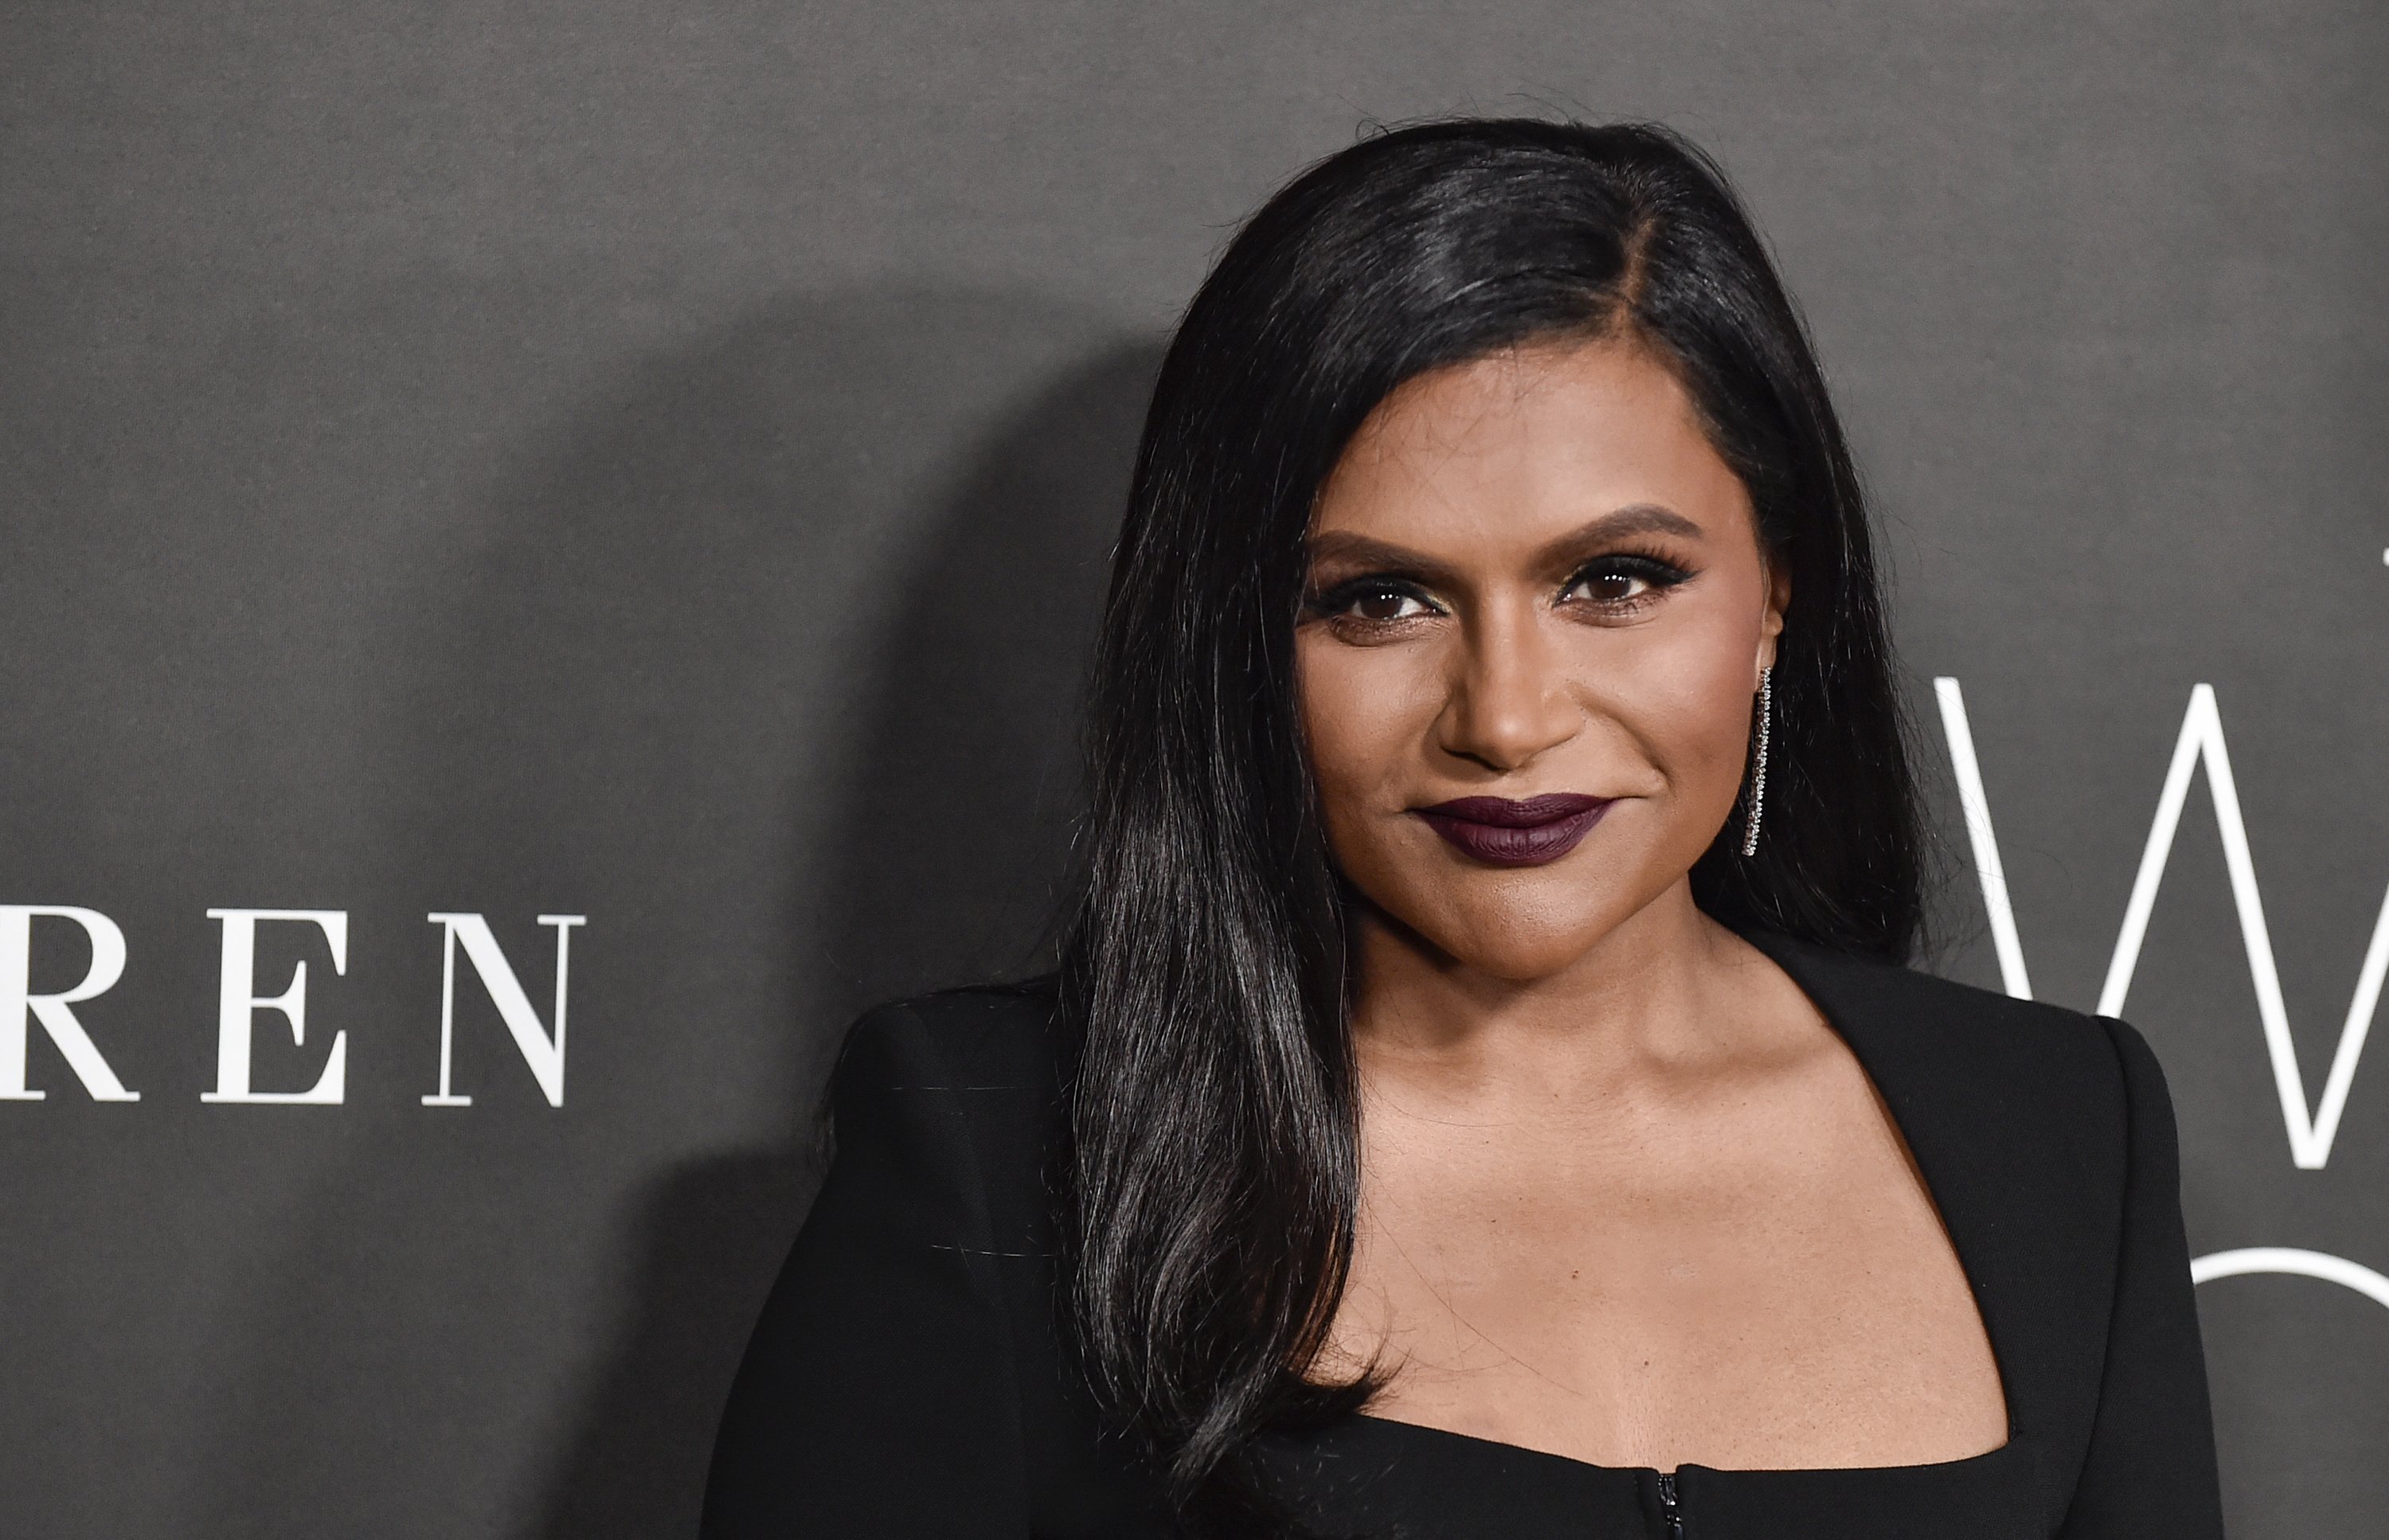 Mindy Kaling attends the 29th annual ELLE Women in Hollywood celebration in October, 2022 in Los Angeles. | Source: Getty Images